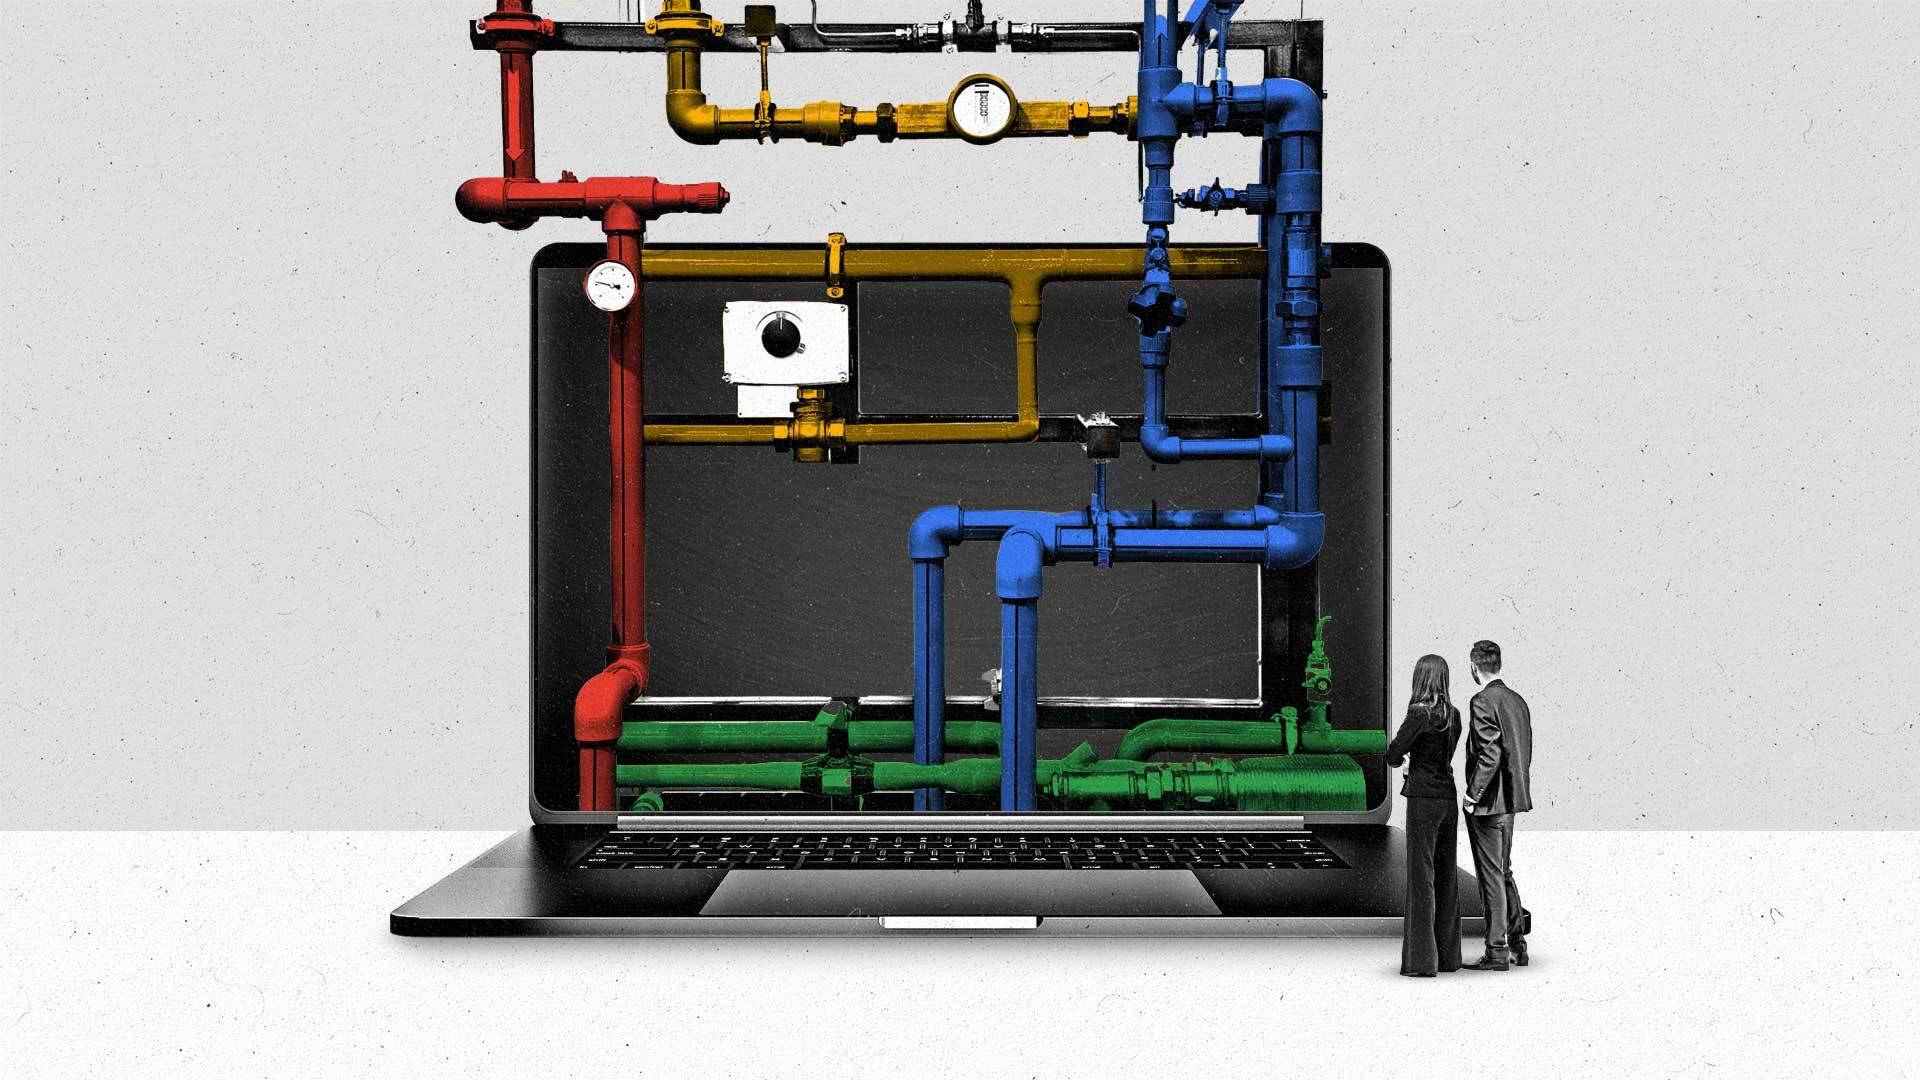 A series of multicolored pipes flow down into a laptop screen as two people watch.